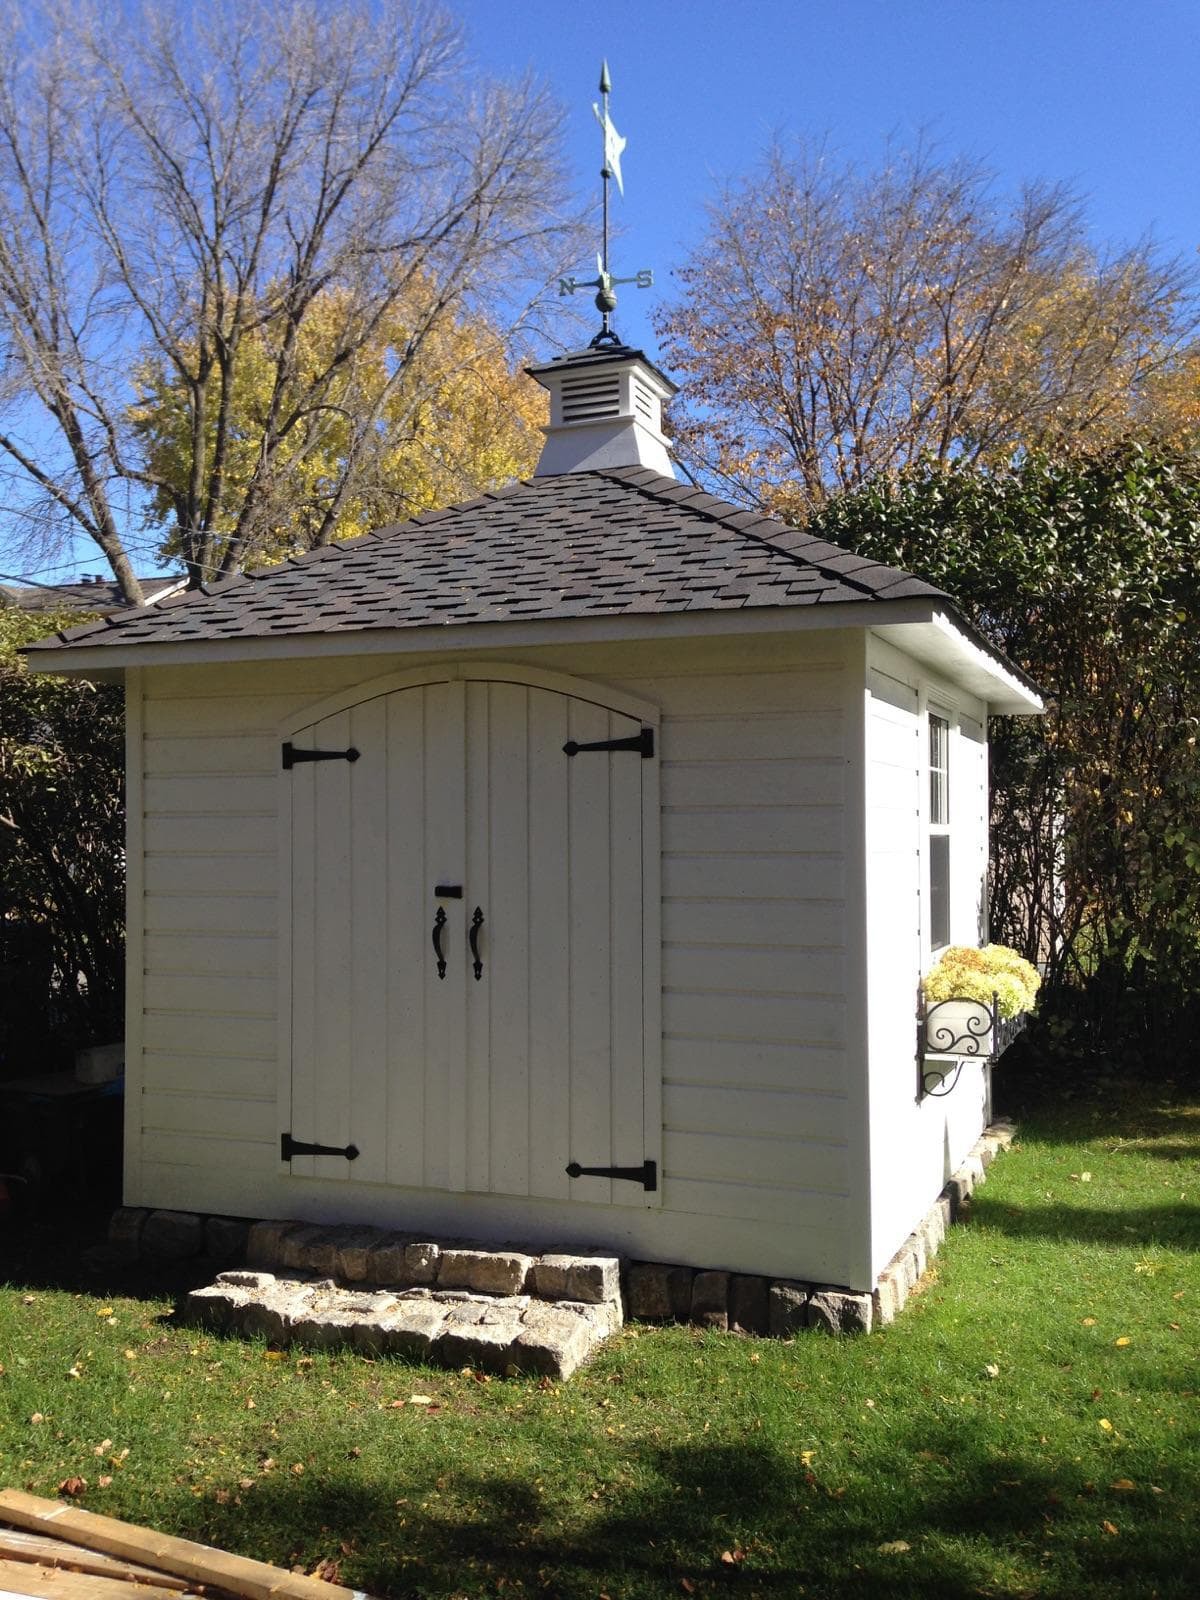 Sonoma 10x10 garden shed with cupola in St Paul Minnesota. ID number 220668-4